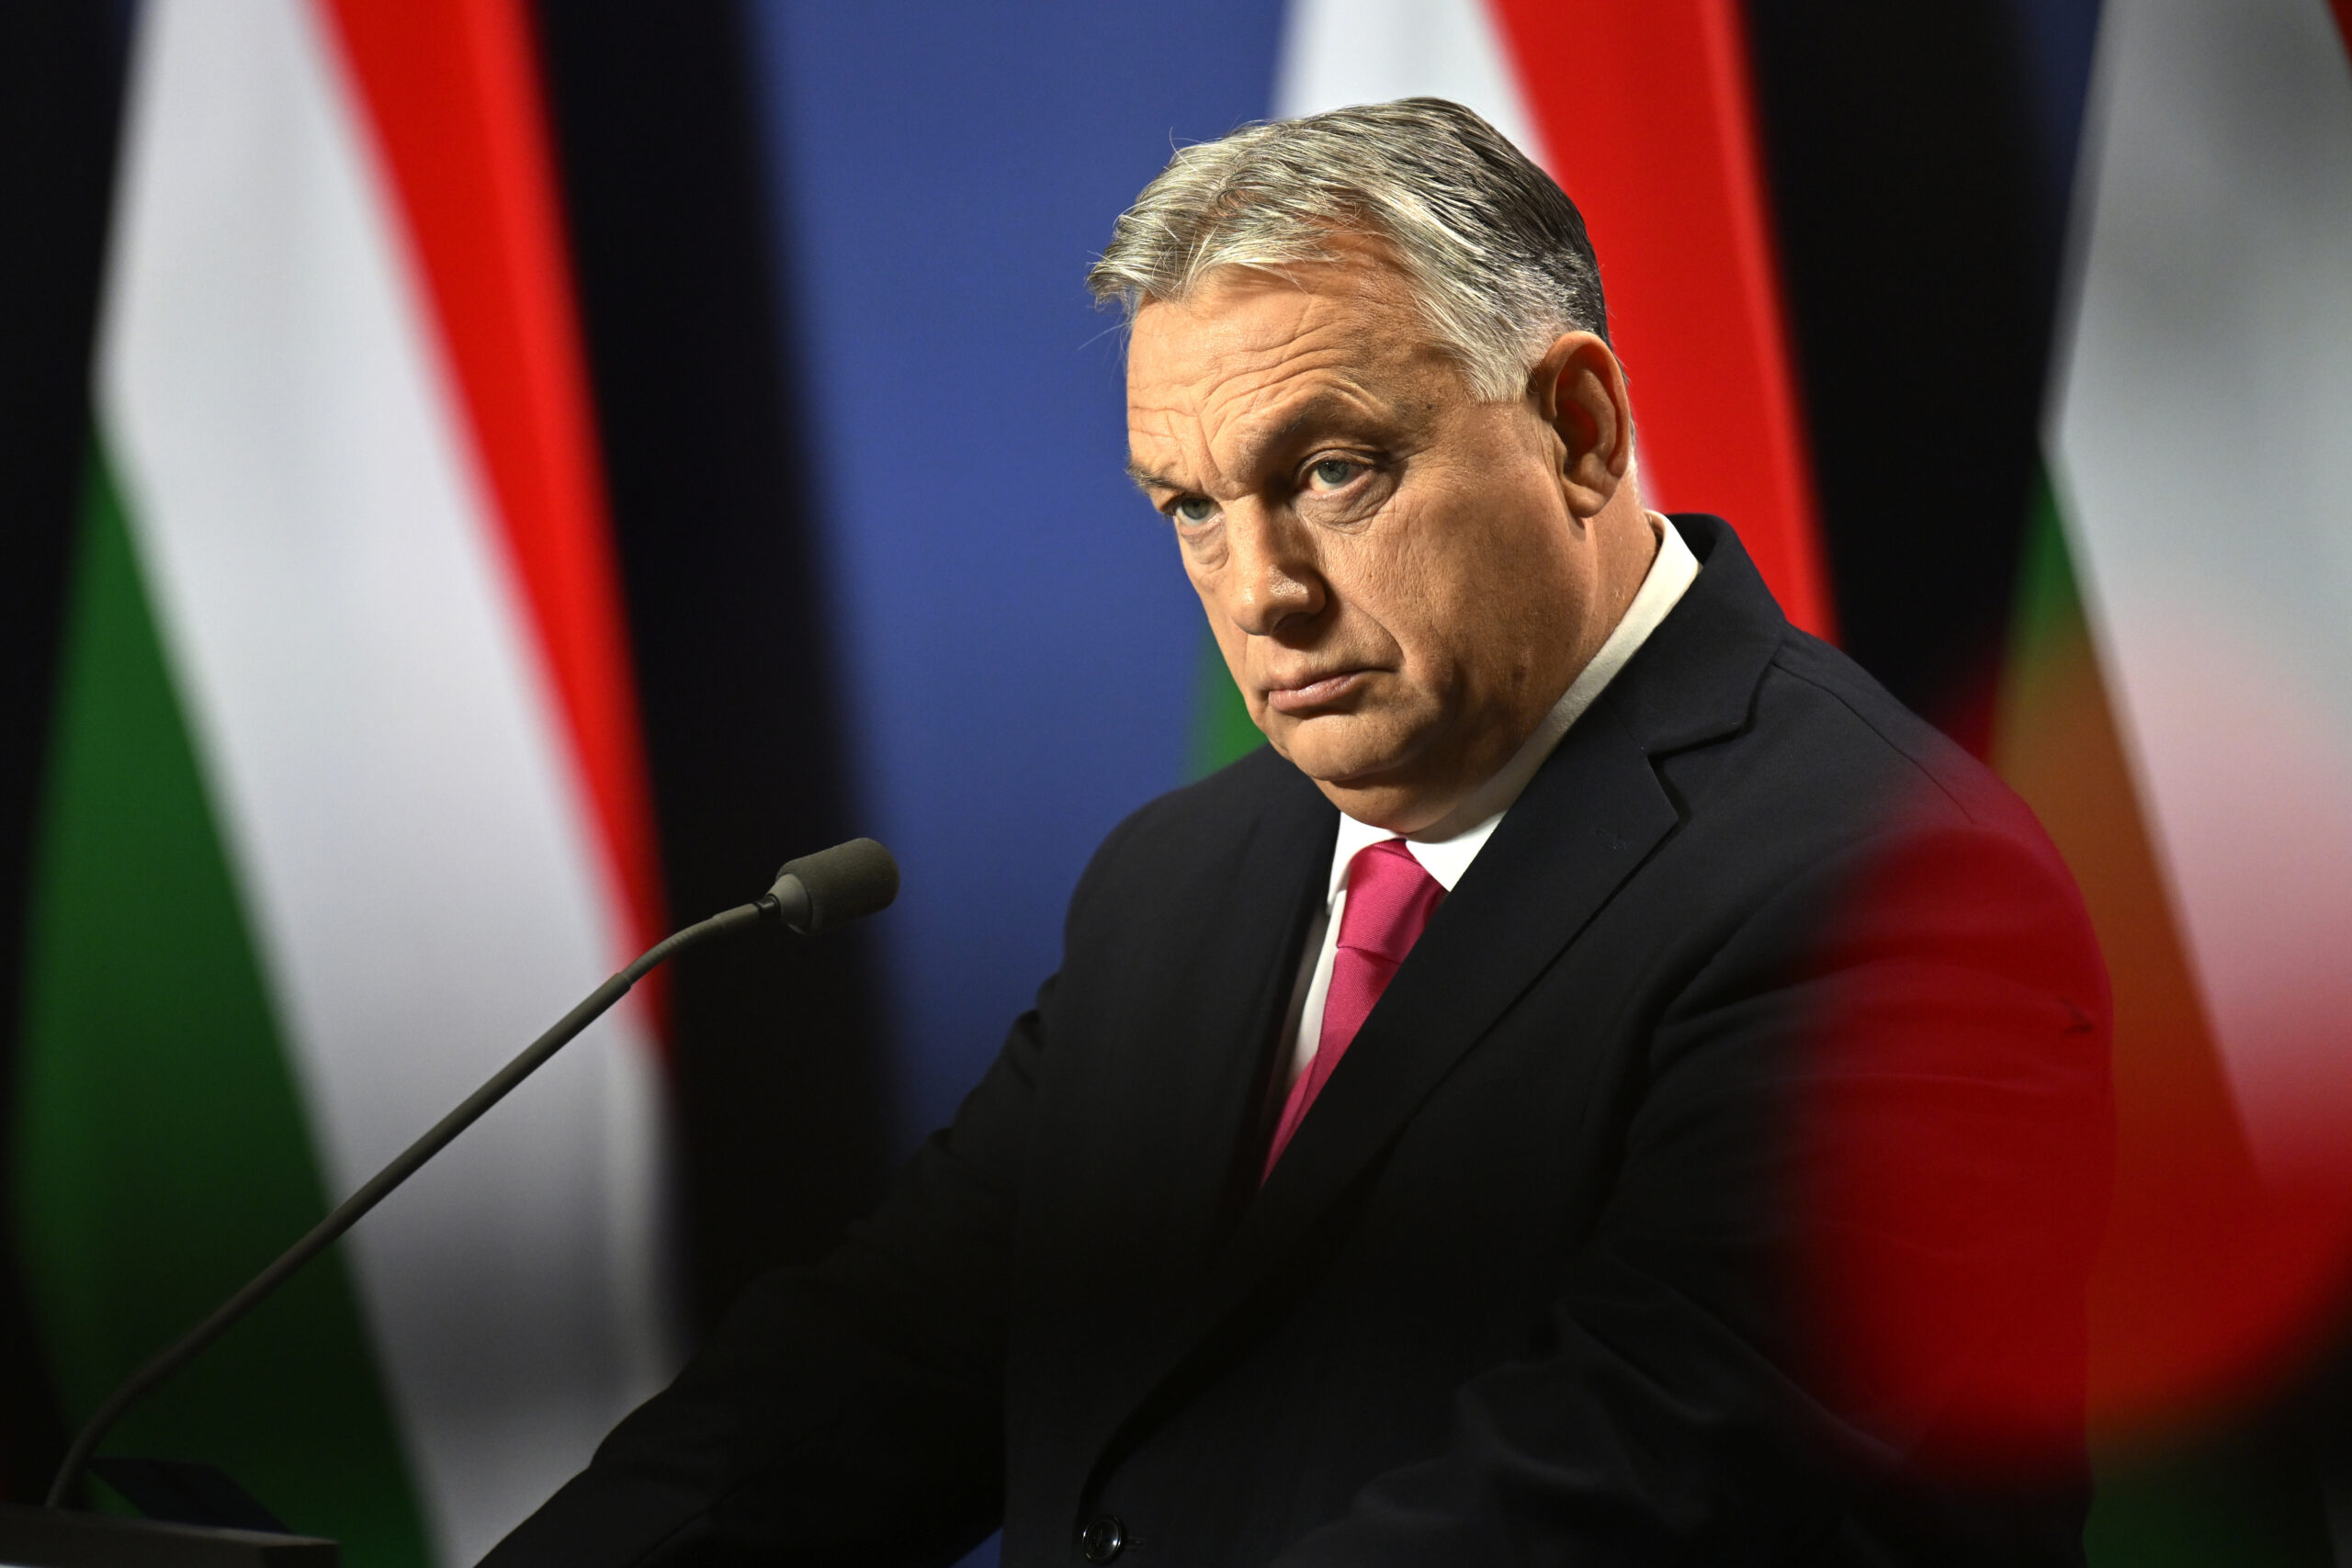 Hungary blocked a new package of EU sanctions against Russia